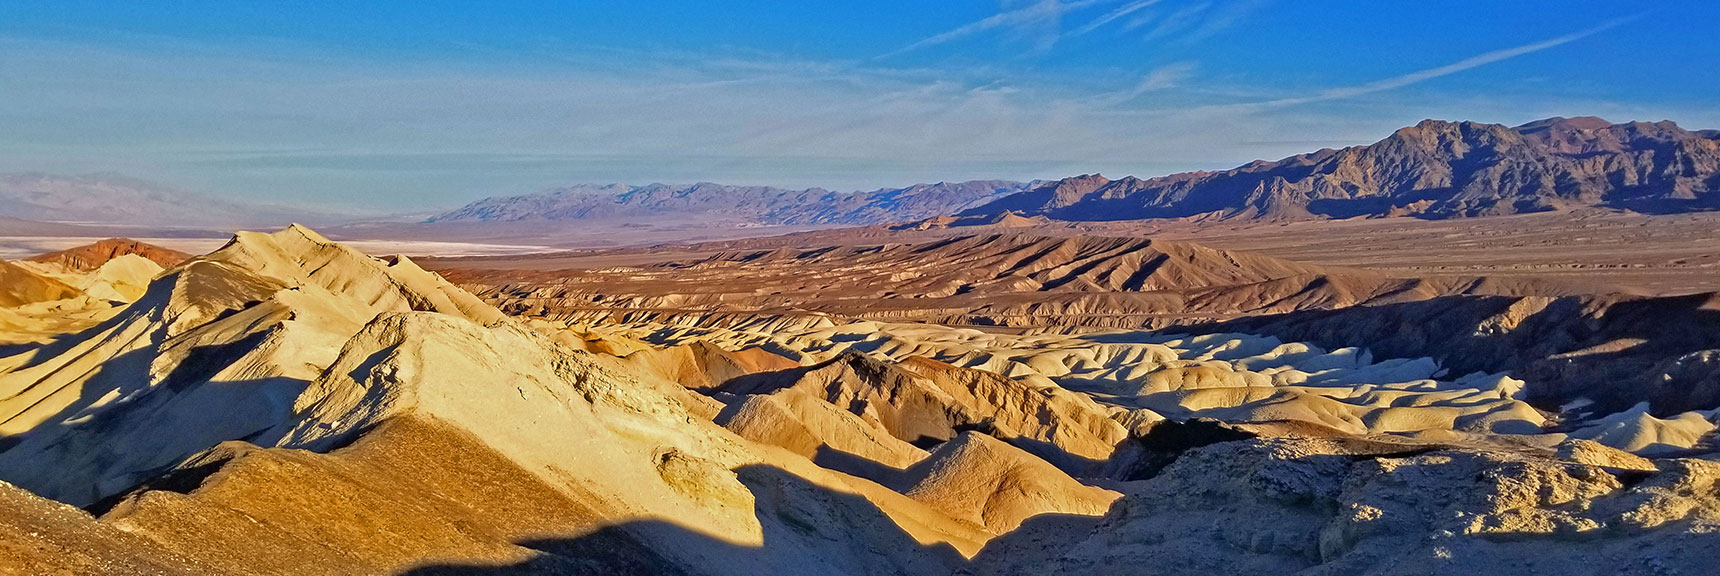 View Northeast Up Death Valley from High Canyon Ridge | Twenty Mule Team Canyon | Death Valley National Park, California